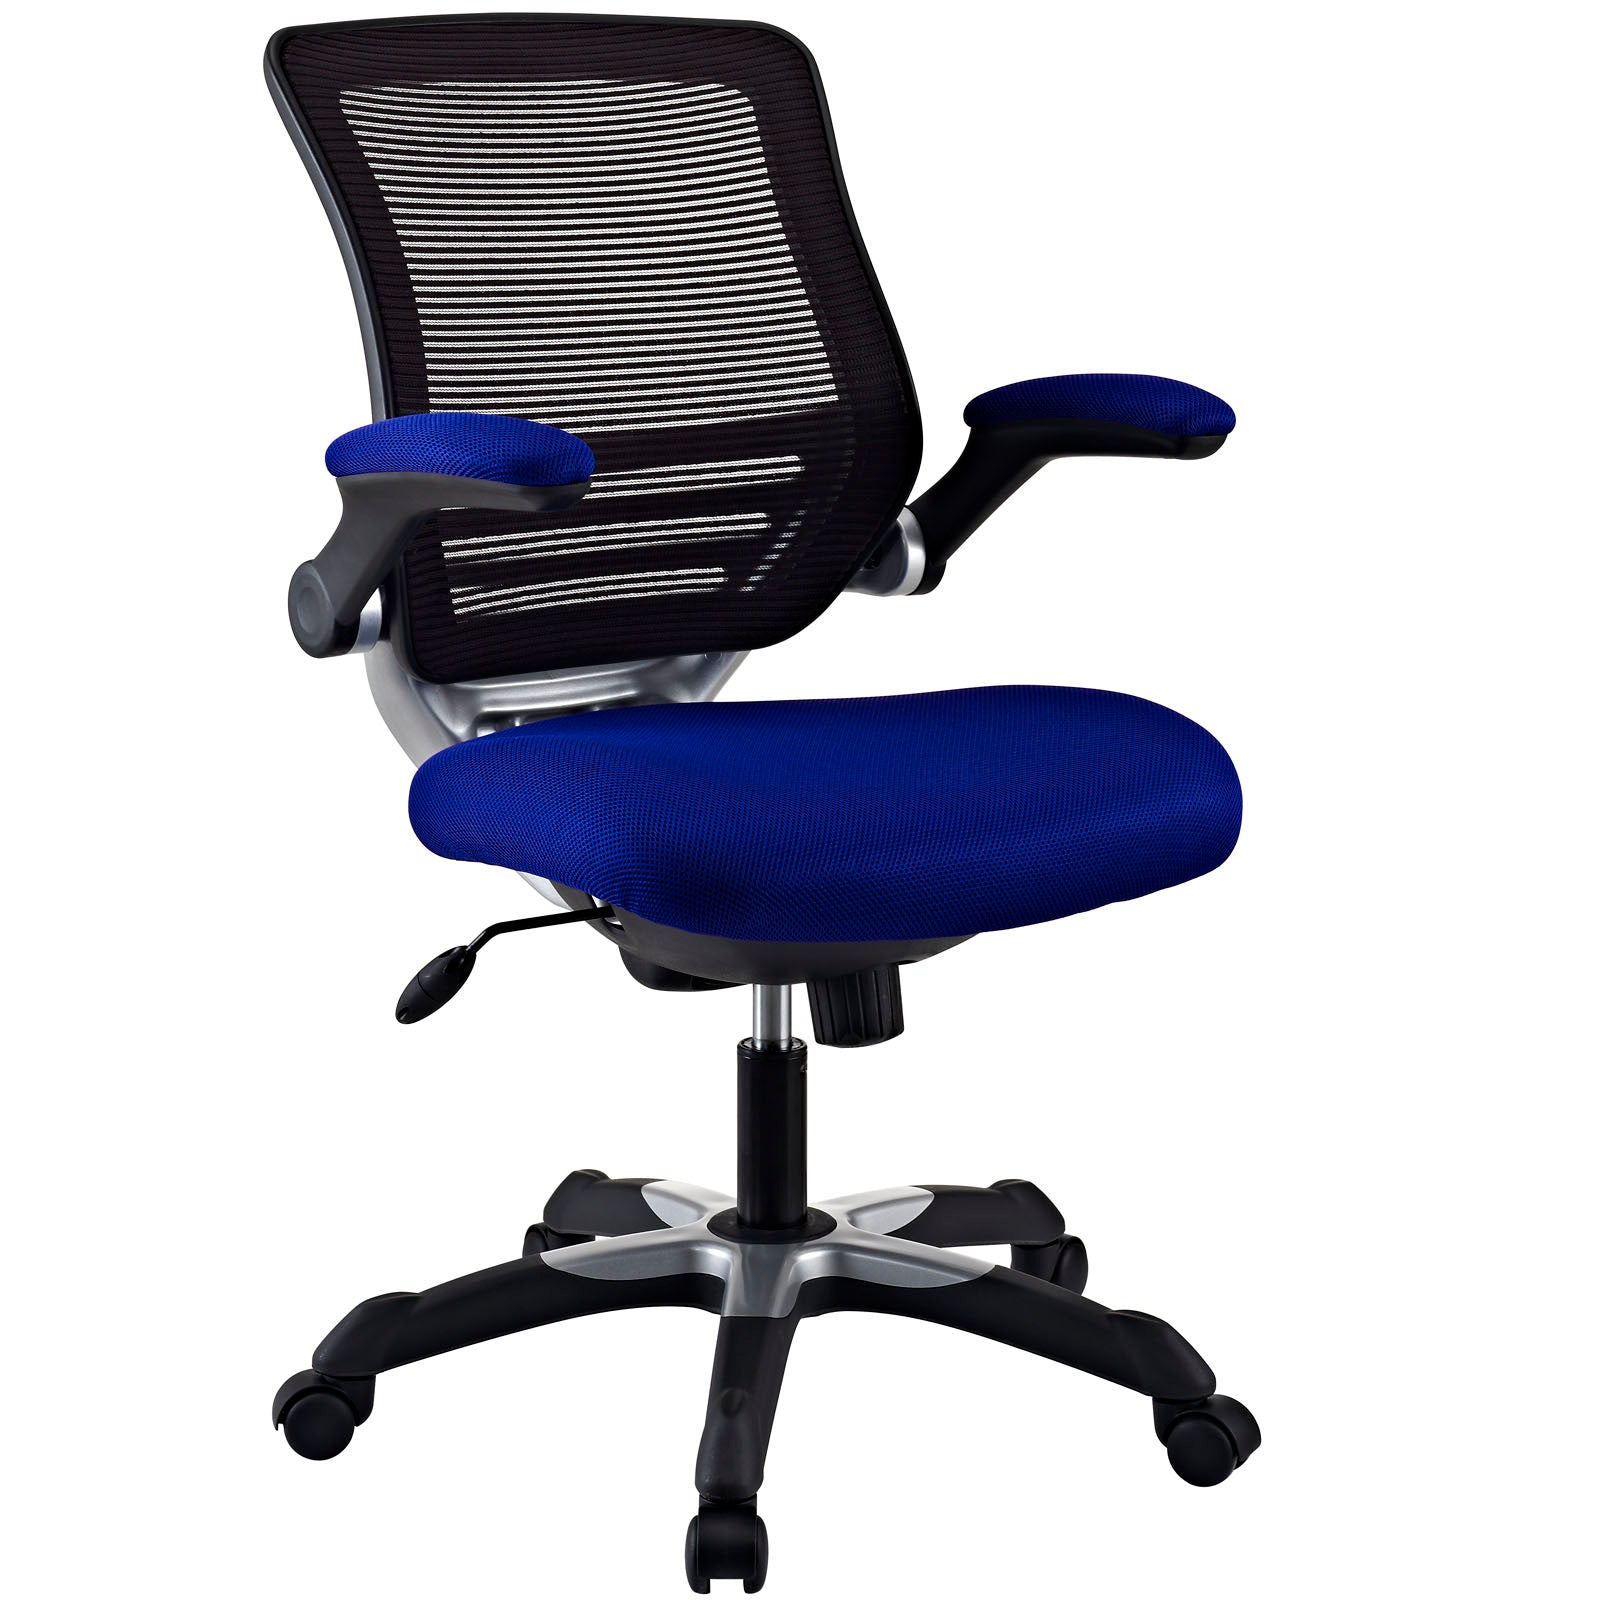 Buy Blue Edge Mesh Office Chair at BUILDMyplace